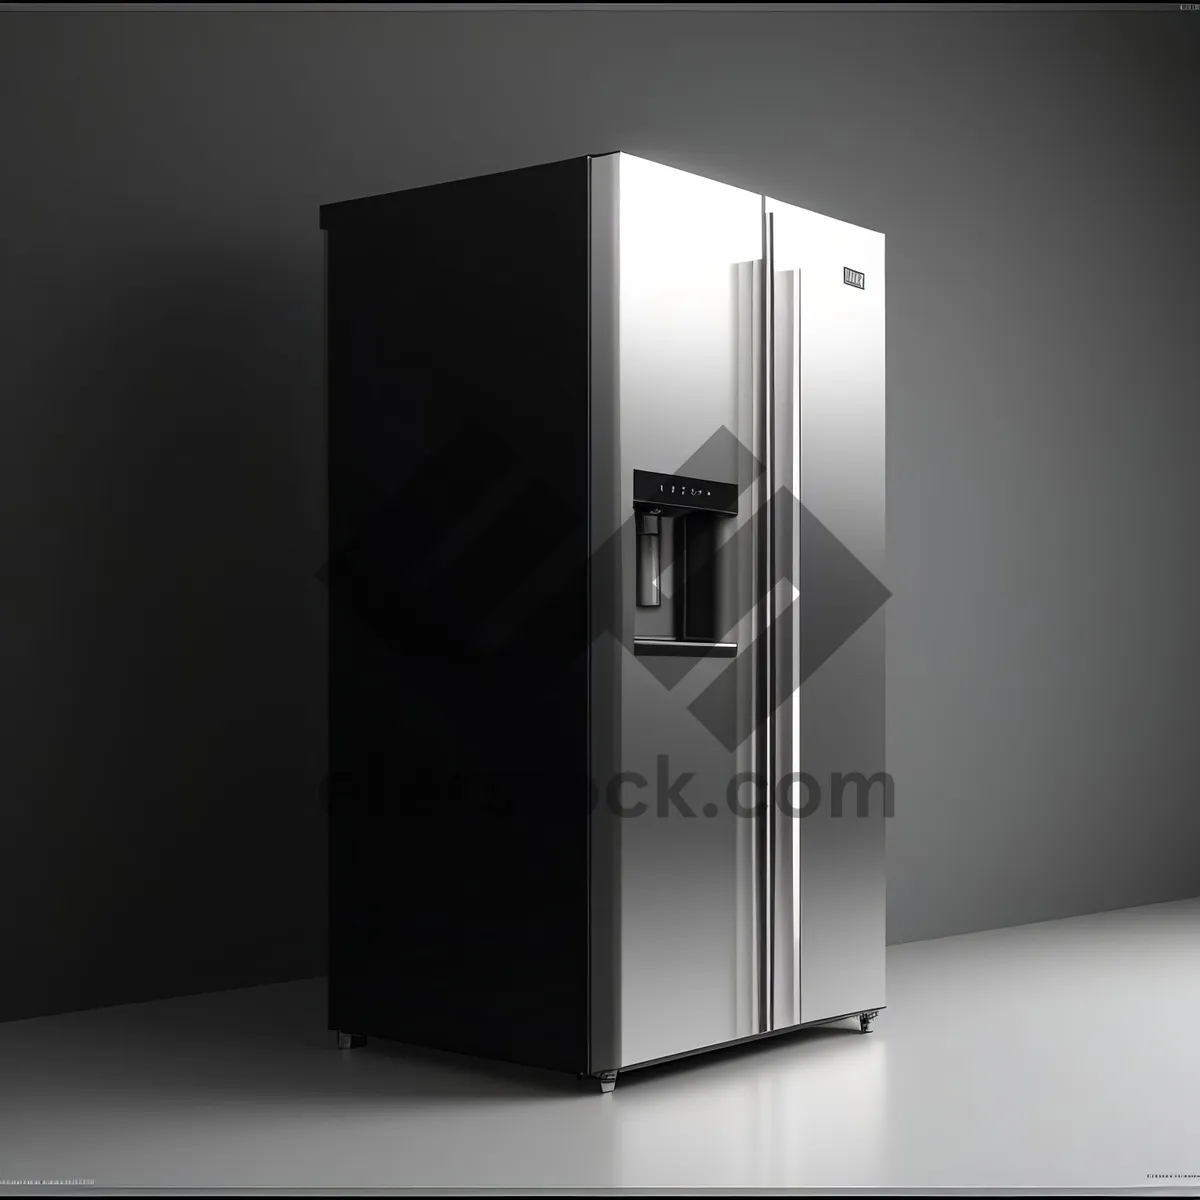 Picture of Modern Furnishing: Sleek 3D Wardrobe Cabinet for Home Interior